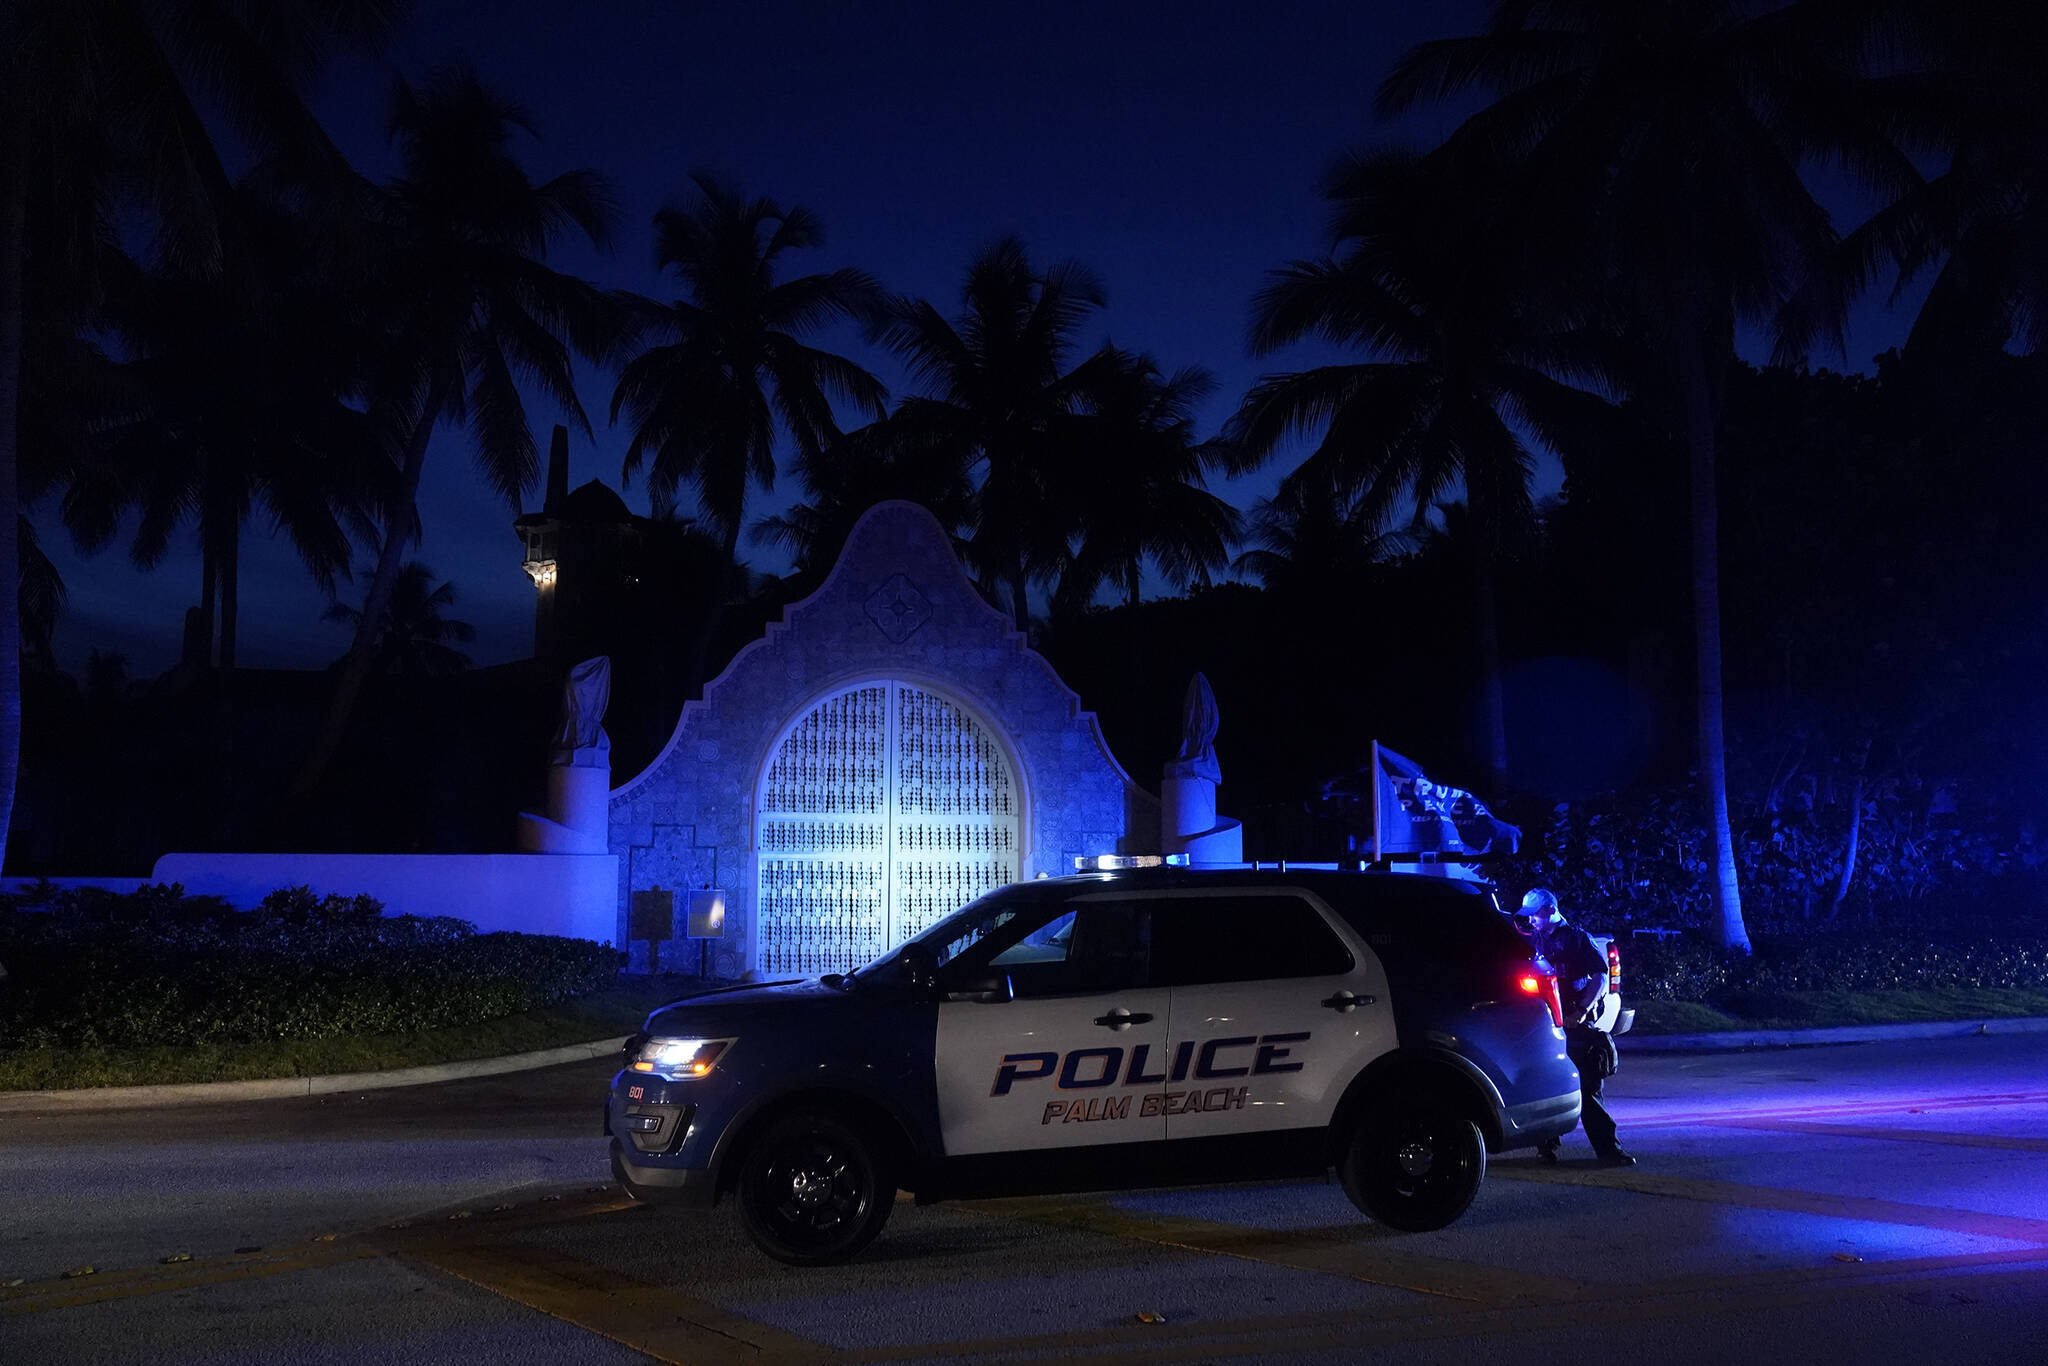 Police stand outside an entrance to former President Donald Trump’s Mar-a-Lago estate, Monday, Aug. 8, 2022, in Palm Beach, Fla. Trump said in a lengthy statement that the FBI was conducting a search of his Mar-a-Lago estate and asserted that agents had broken open a safe. (AP Photo / Wilfredo Lee)